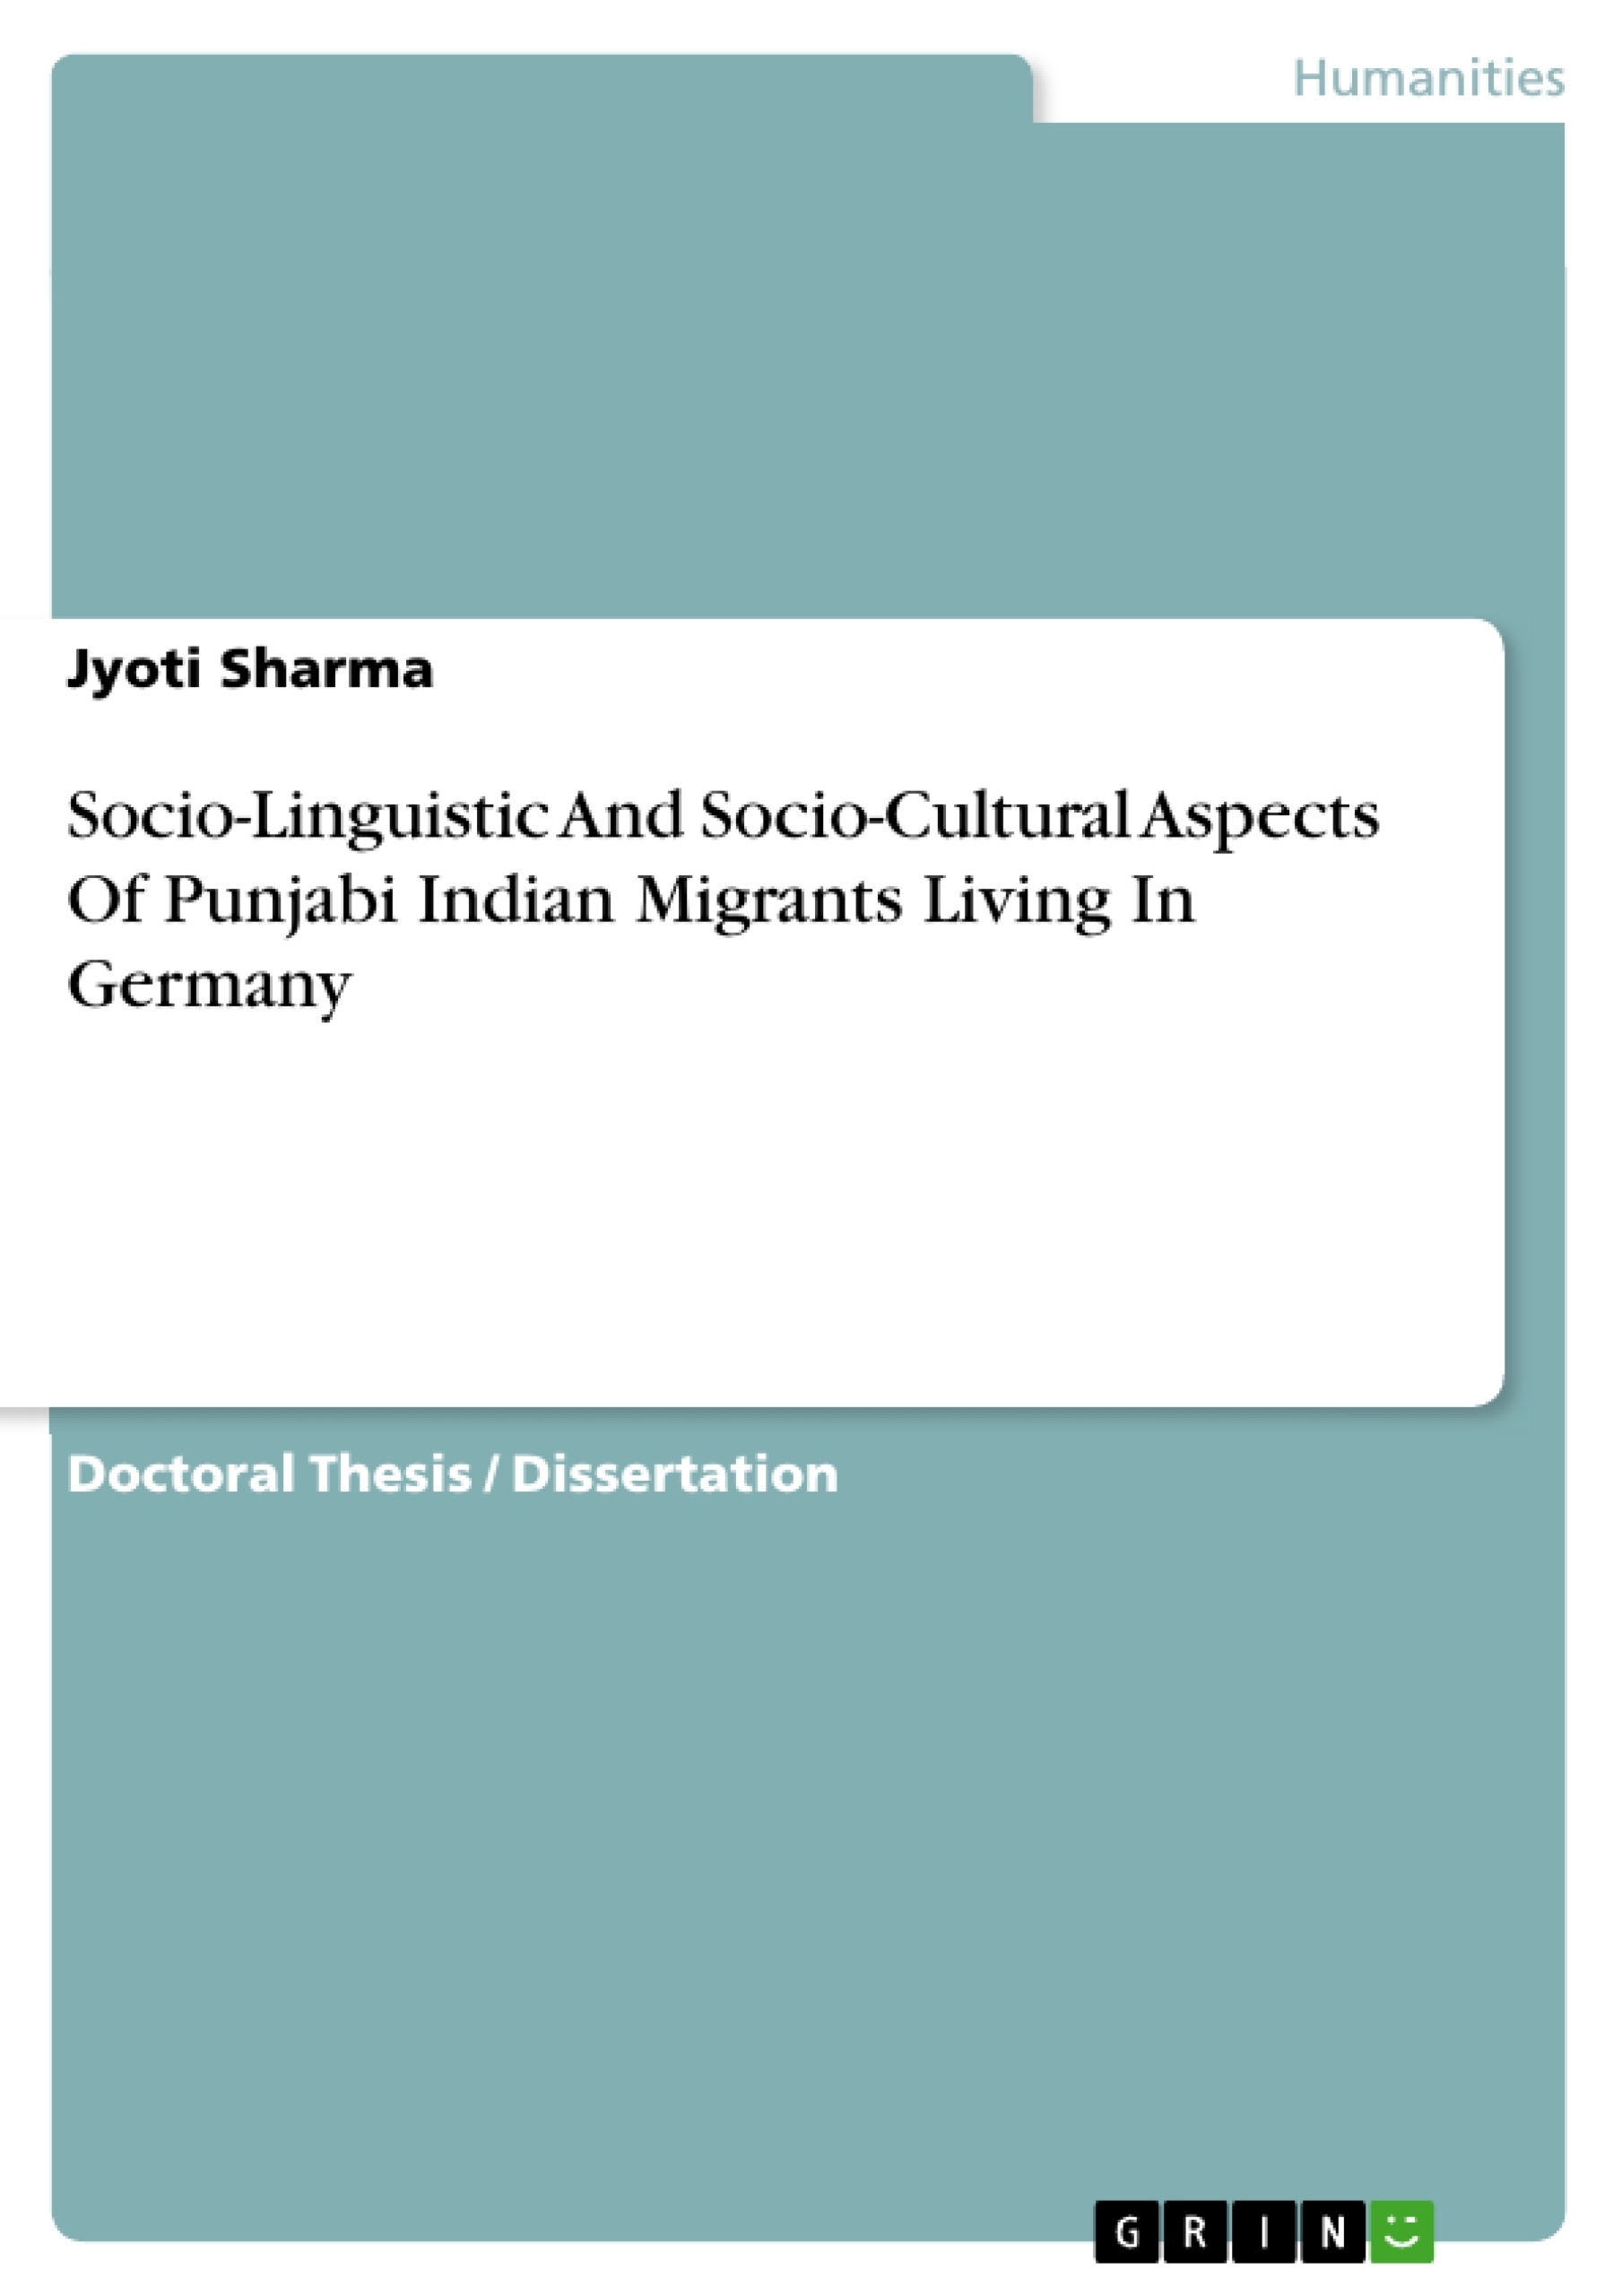 Title: Socio-Linguistic And Socio-Cultural Aspects Of Punjabi Indian Migrants Living In Germany